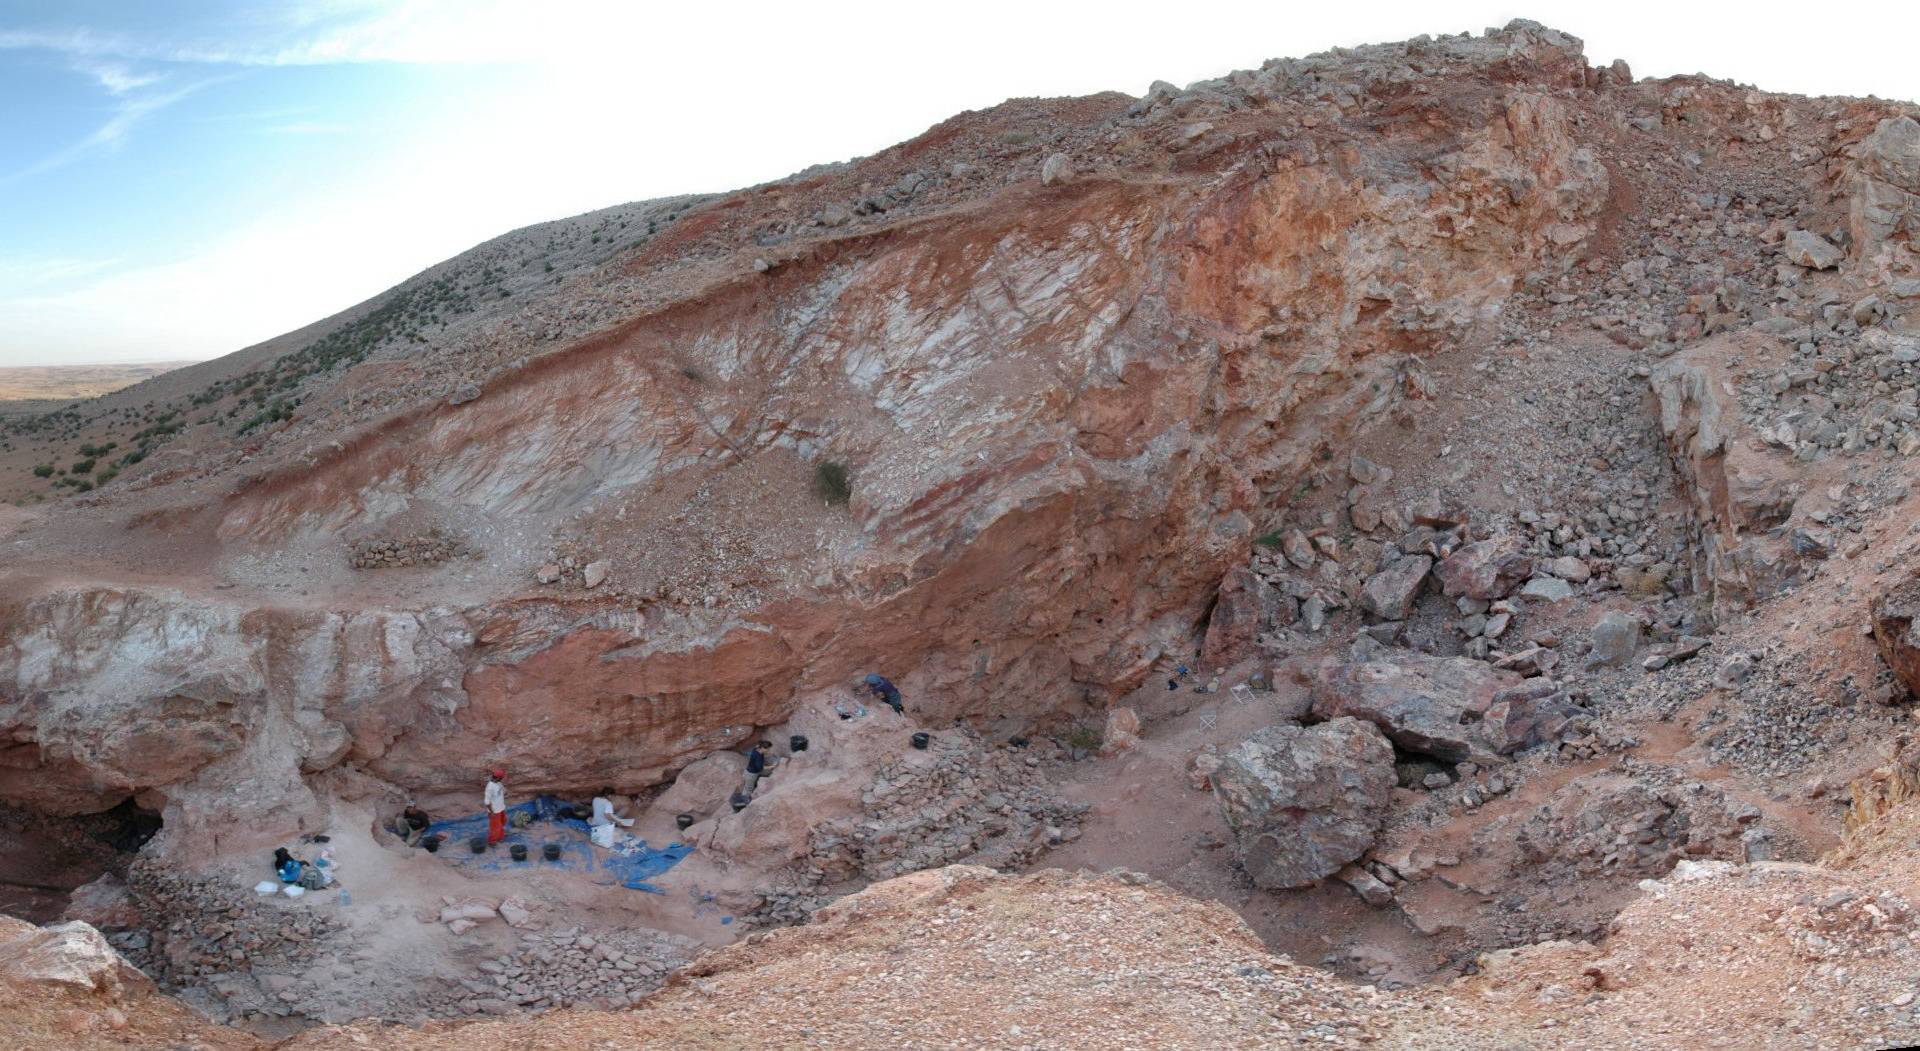 The view looking south of the Jebel Irhoud site in Morocco is shown in this handout photo